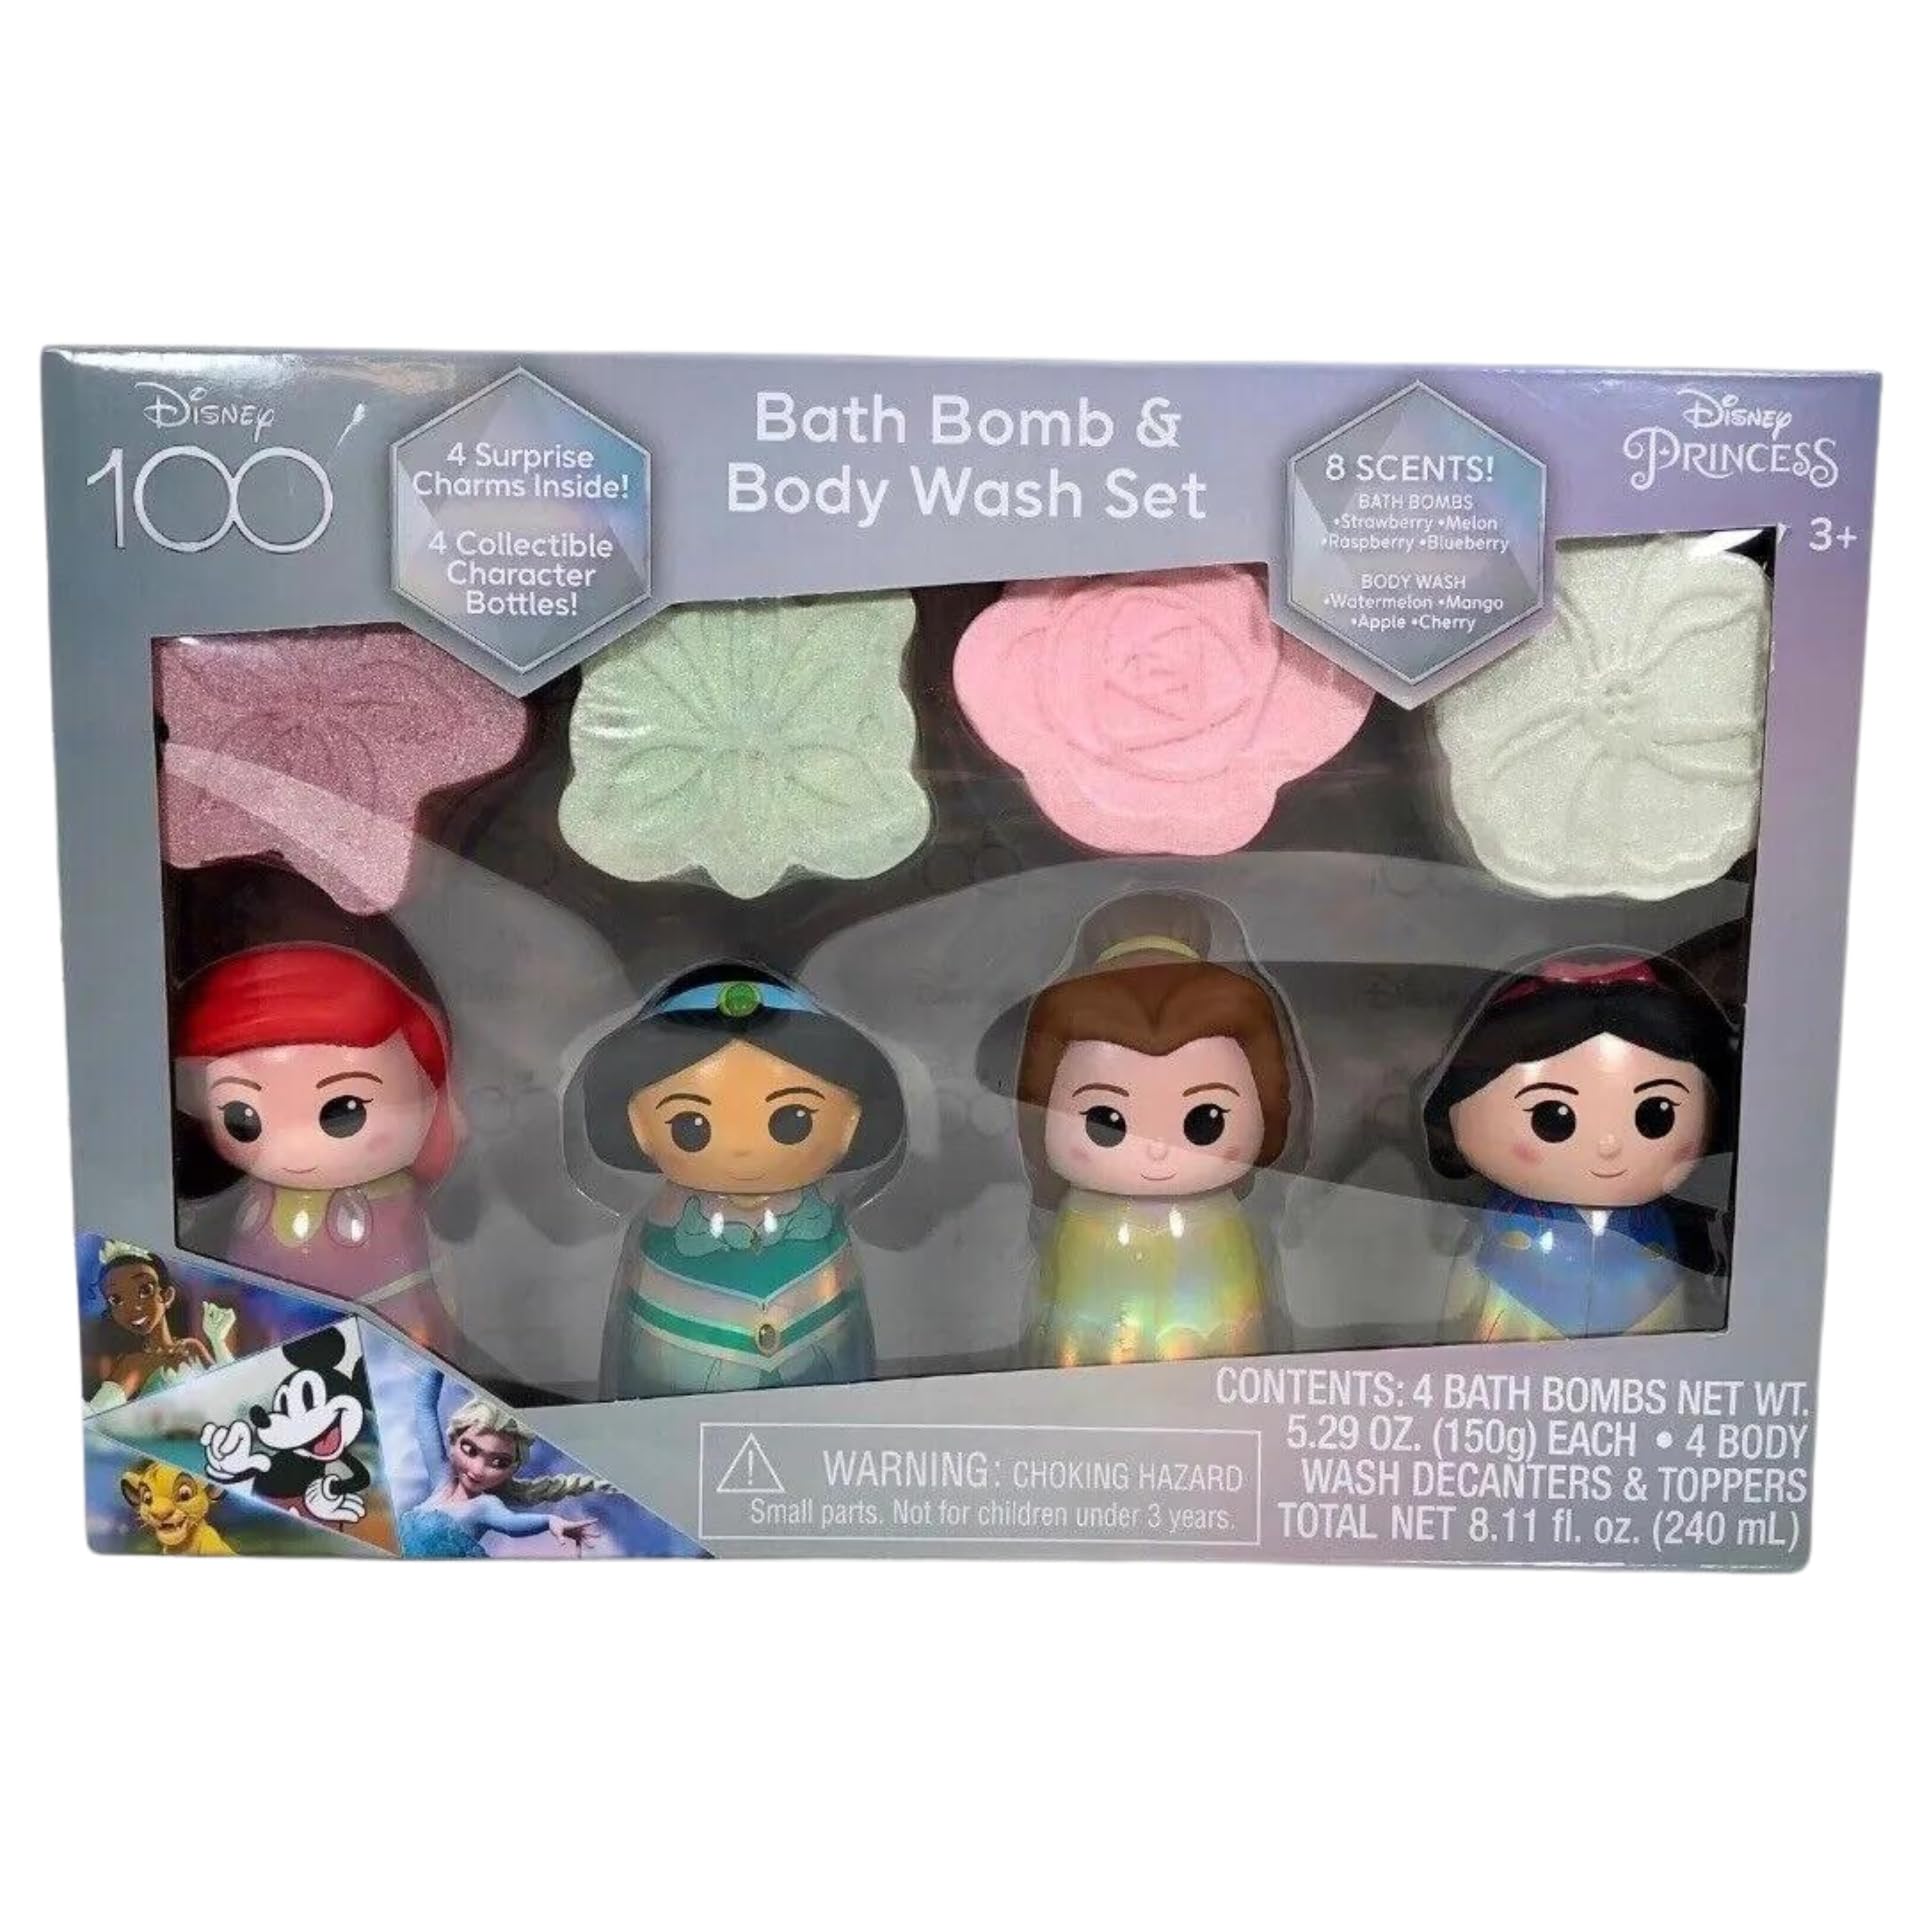 Disney Princess Bath Bomb & Body Wash Set, 8-Piece Set with 4 Scented Body Wash & 4 Bath Bombs, 4 Surprise Charms & 4 Collectible Character Bottles! Make Bath Time Fun! Ages 3+